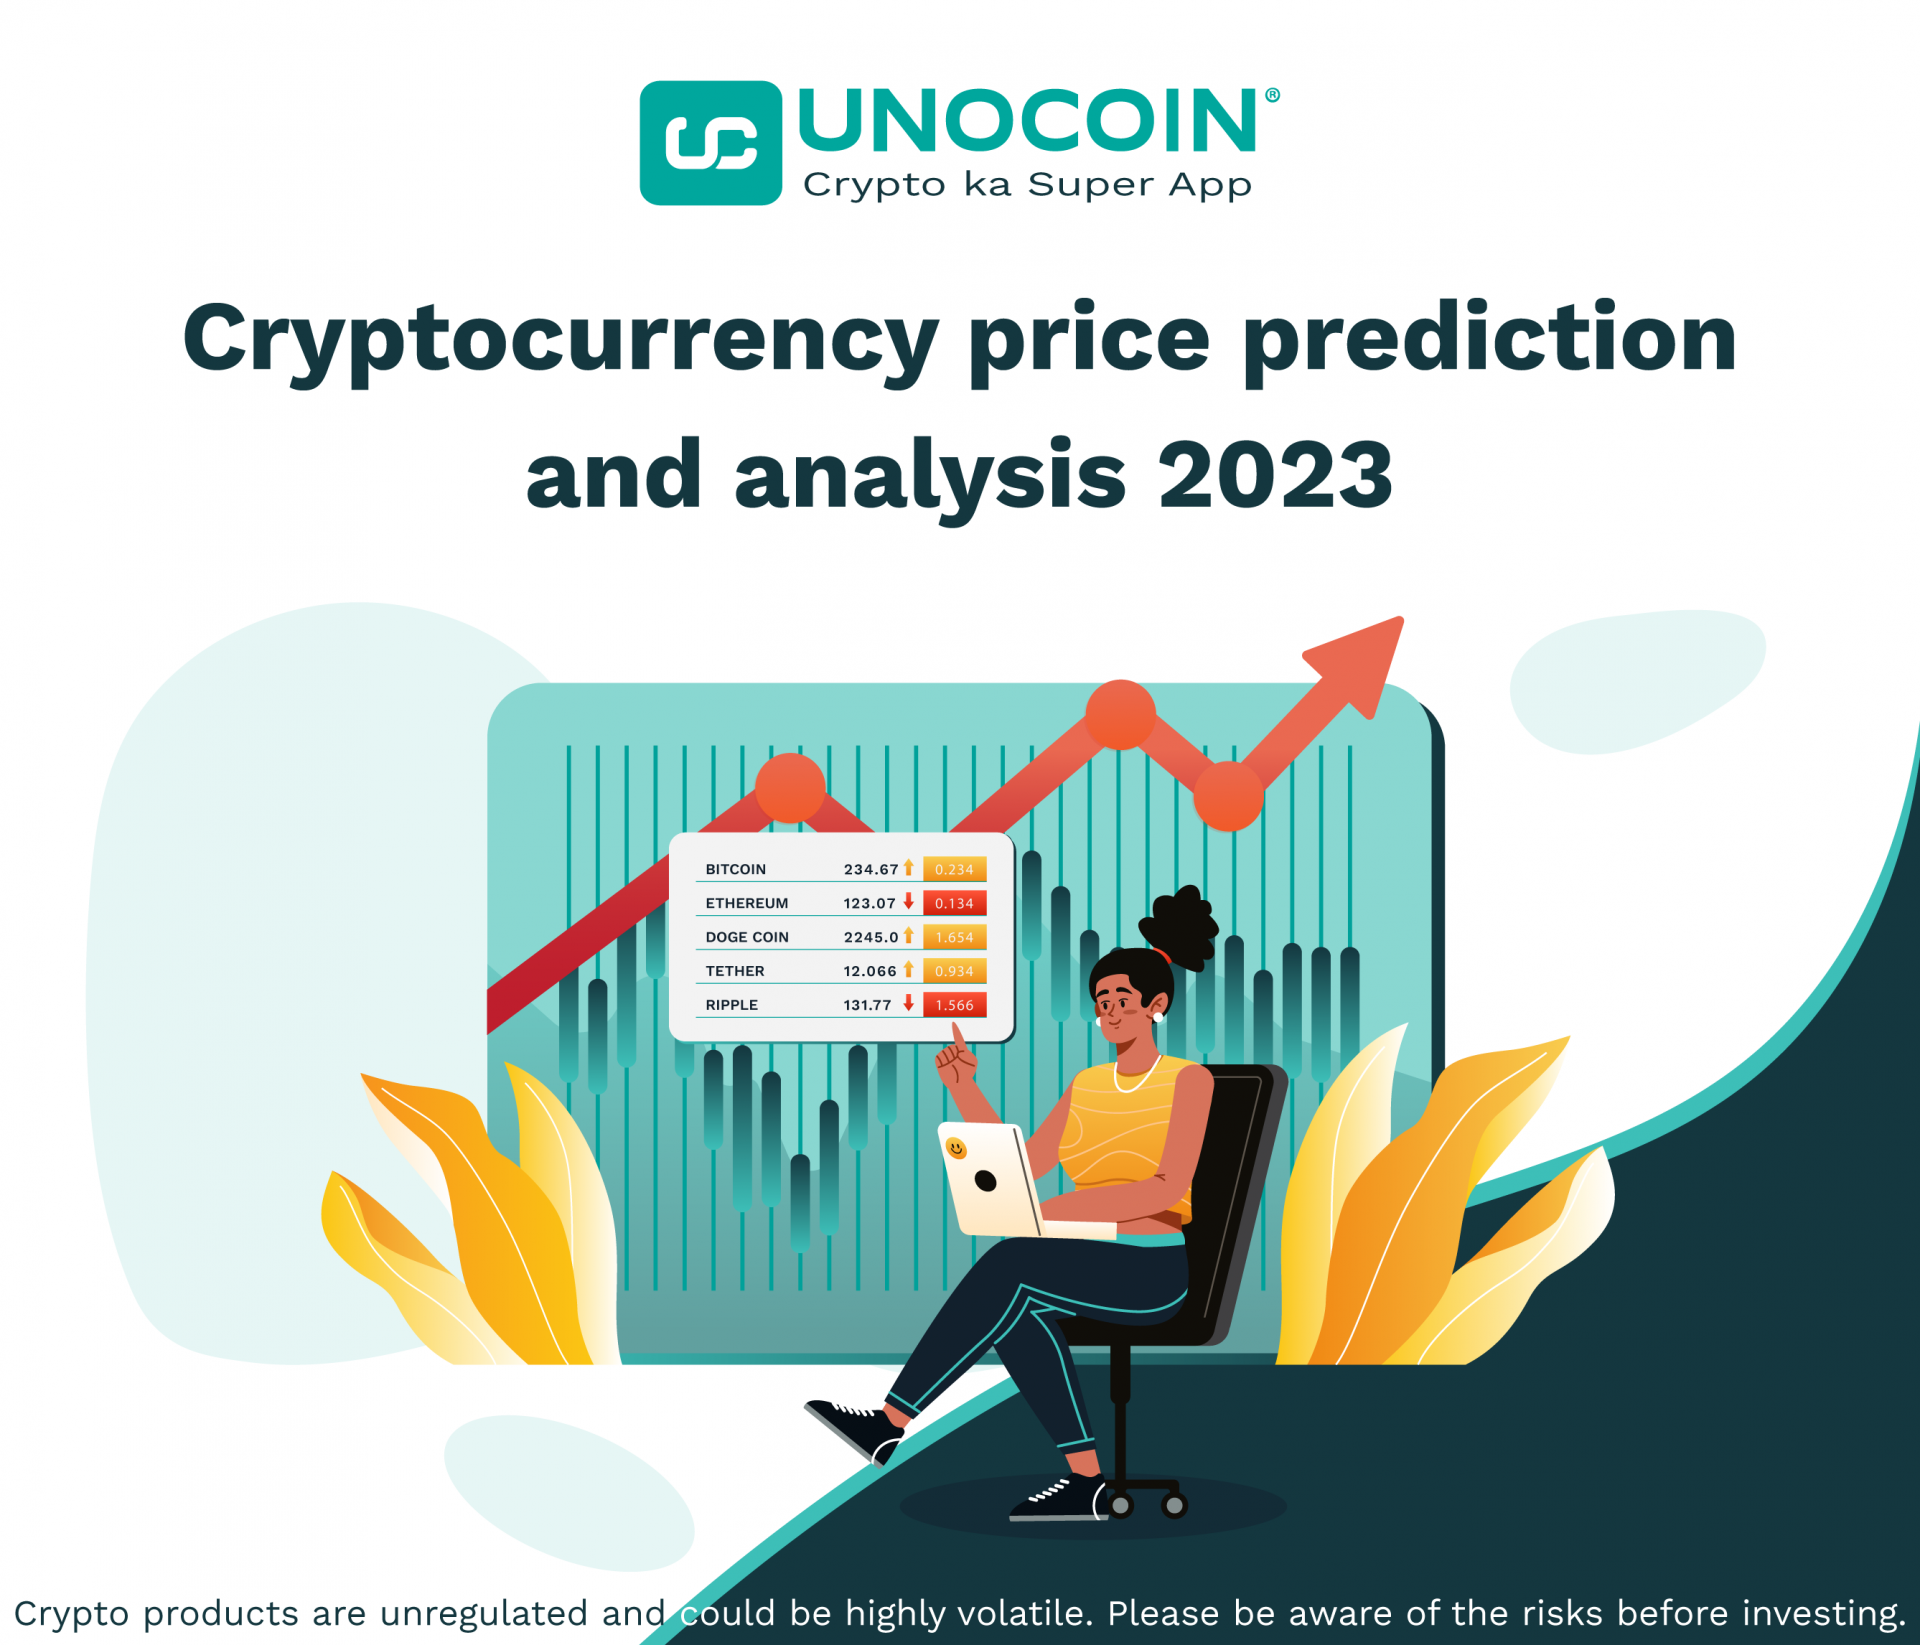 price predictions for crypto currency